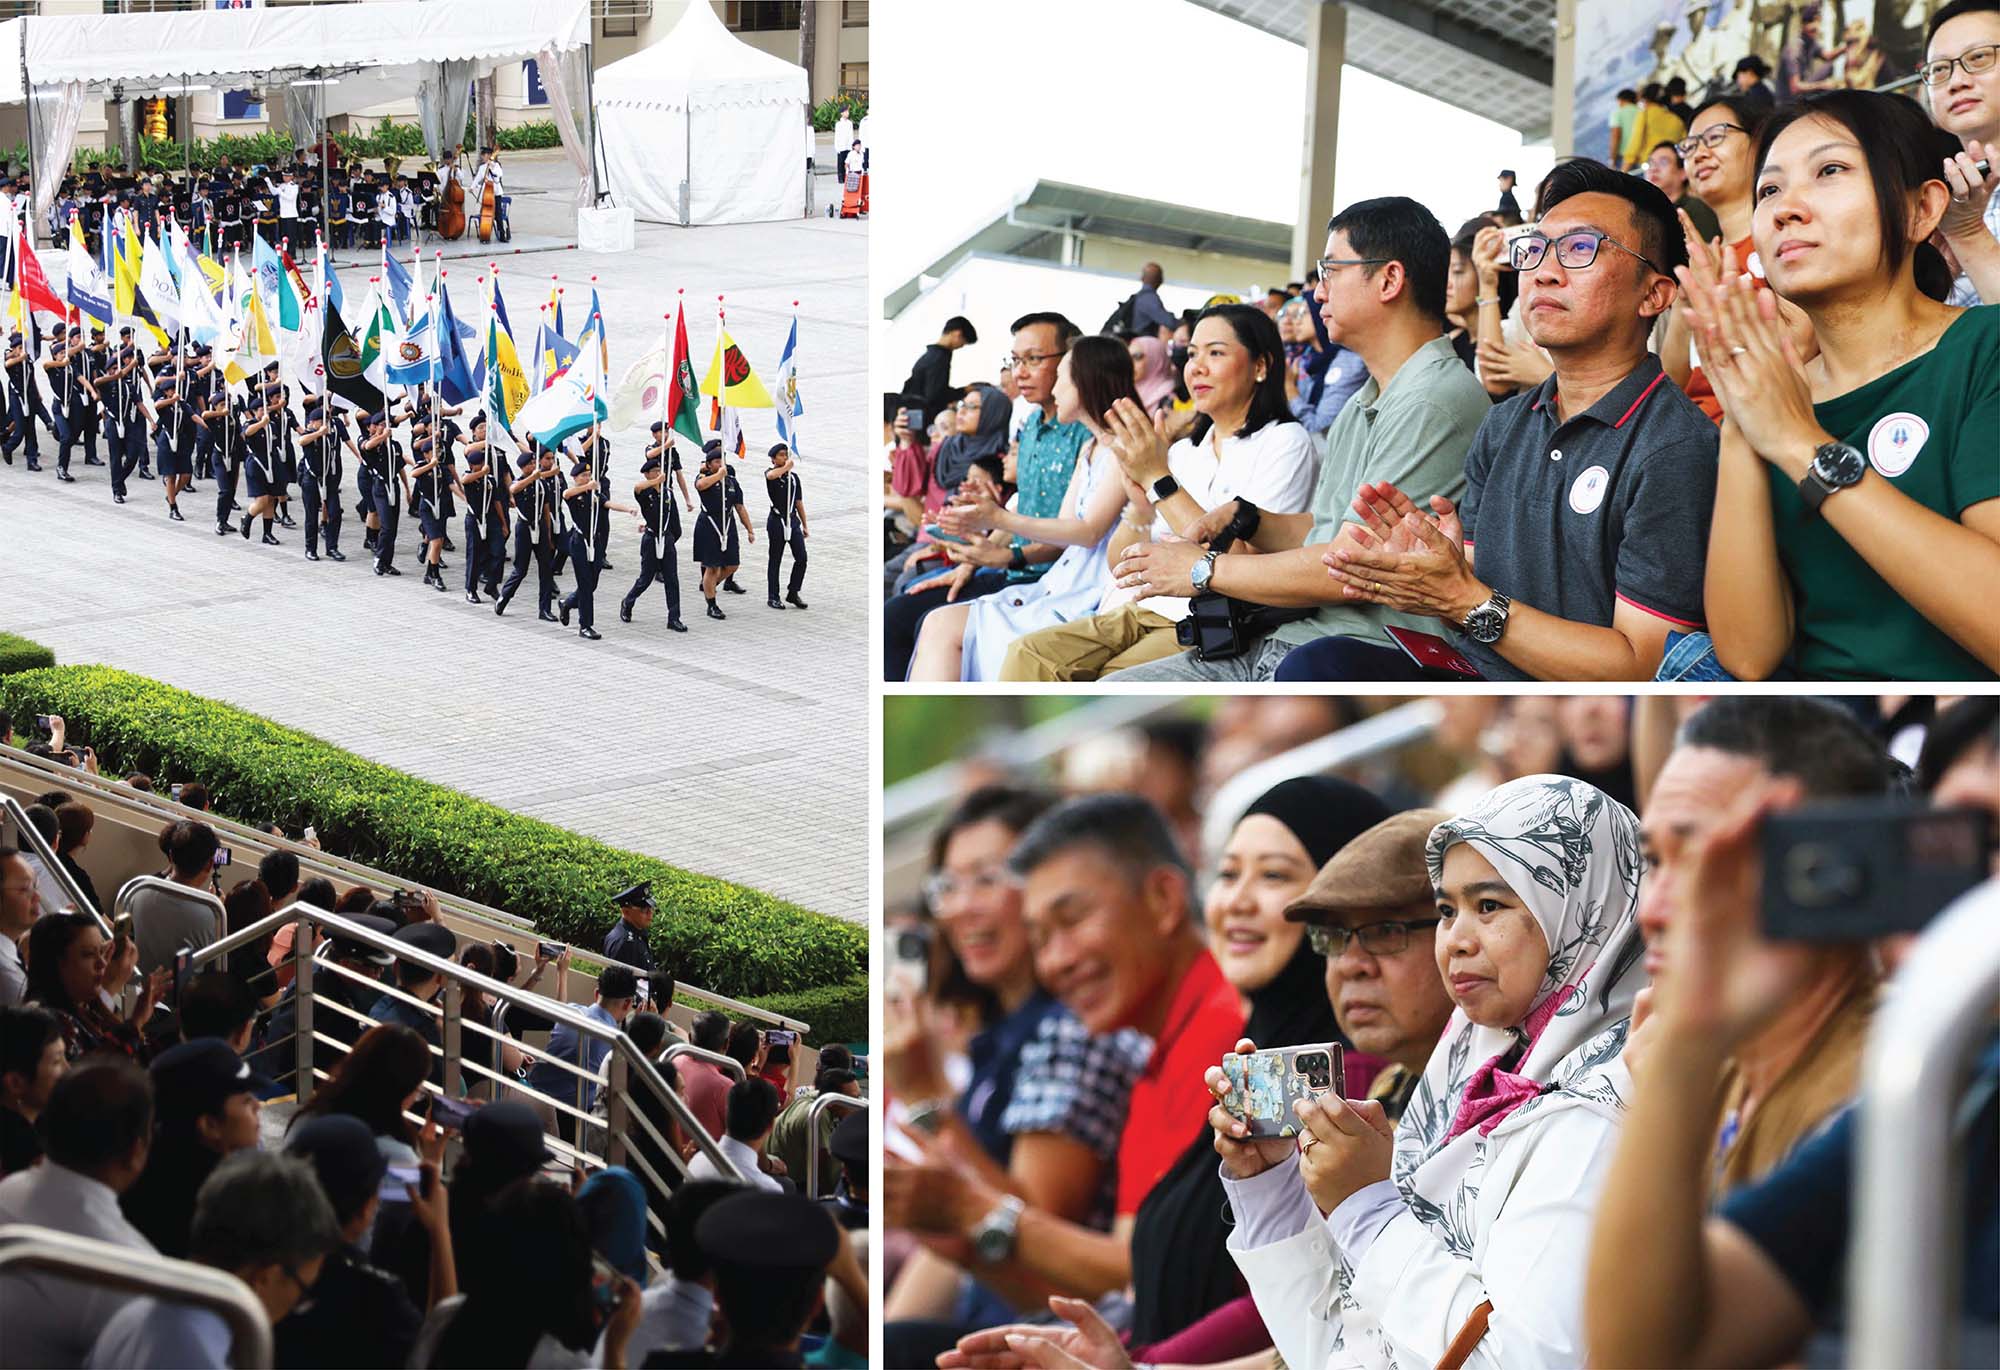 Families and friends of Cadets gather to witness the Parade. PHOTOS: Rose Maswida and Ryan Yeo